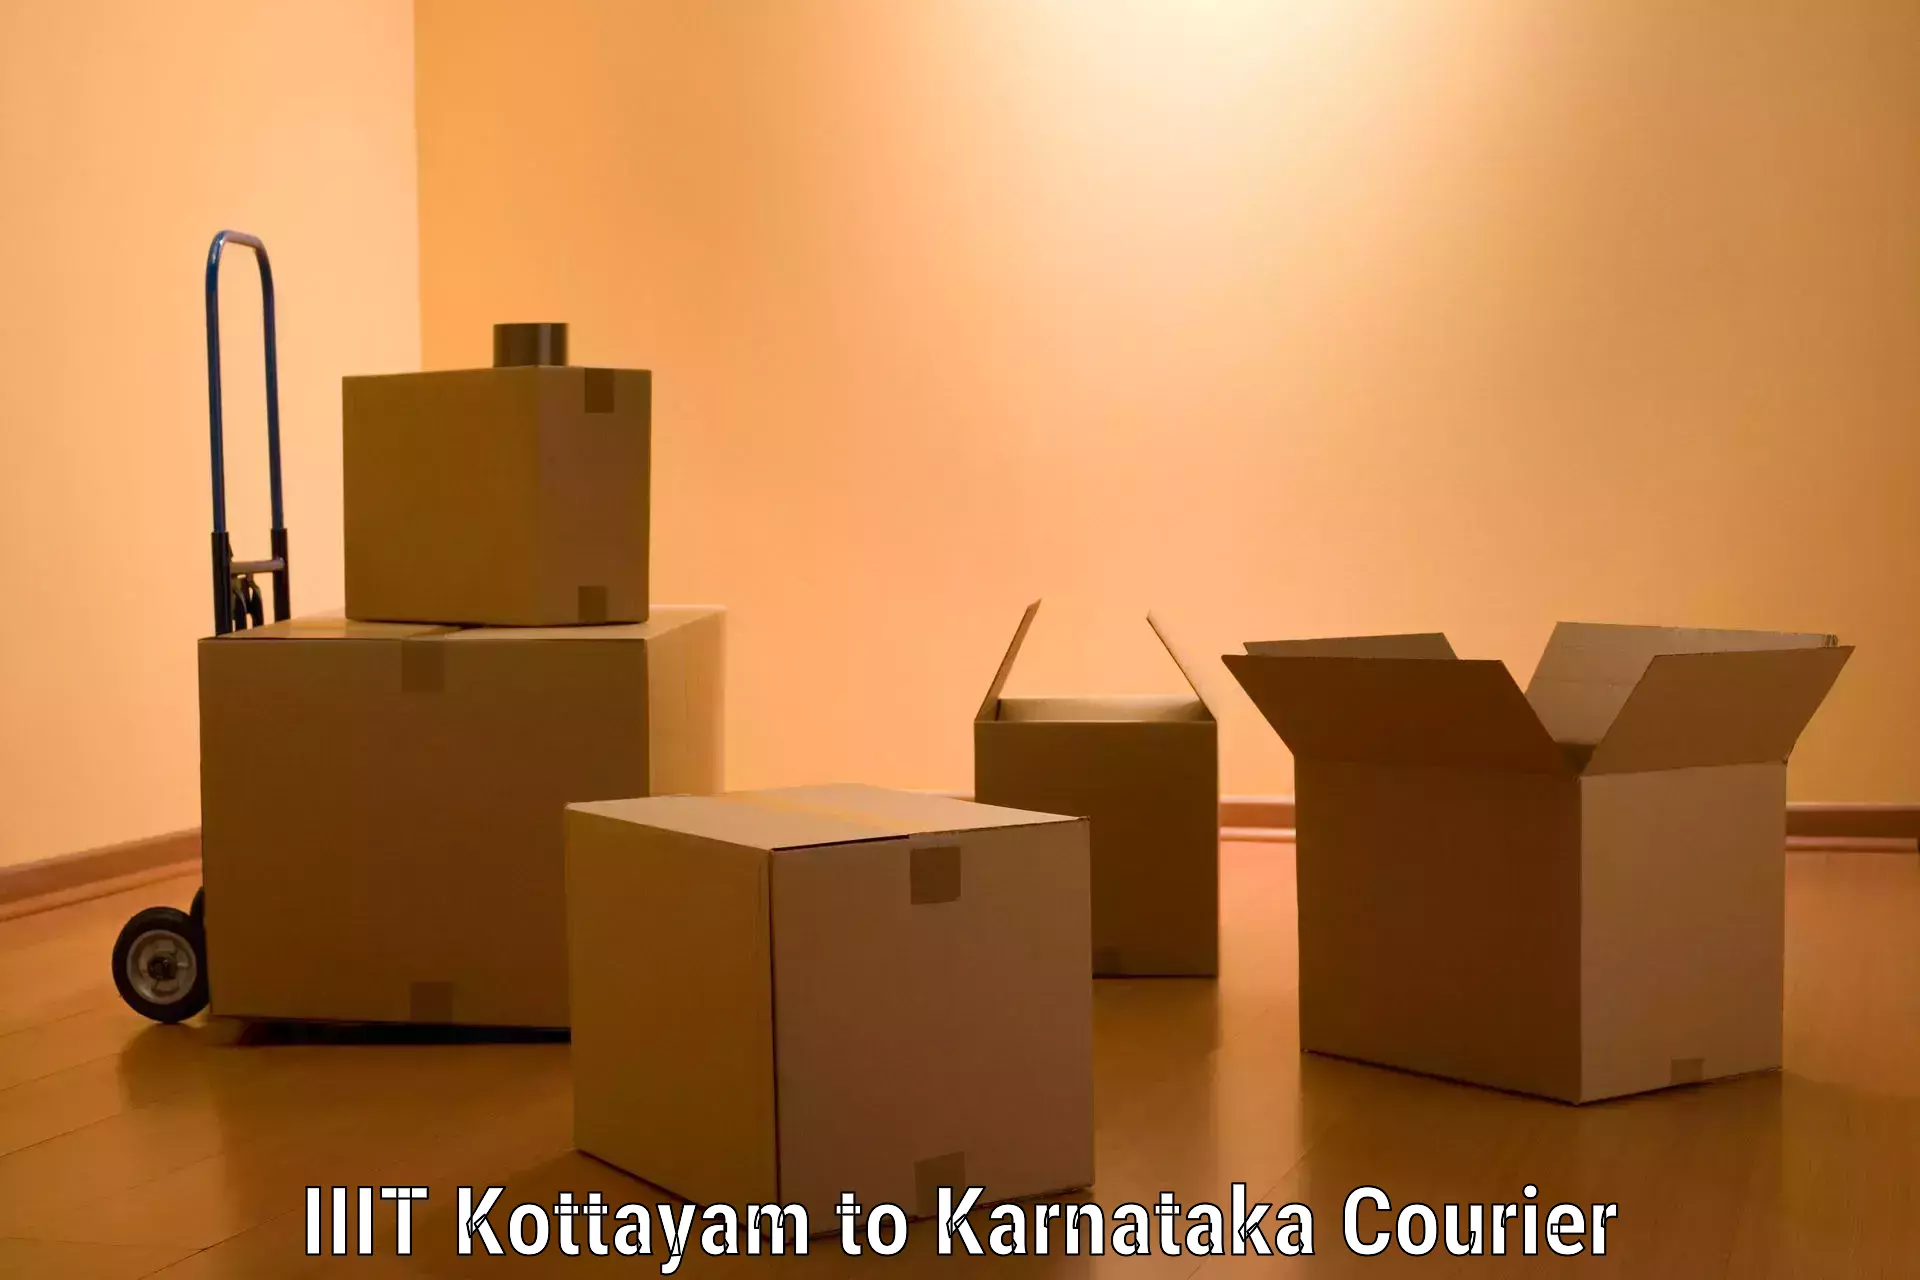 Trusted relocation experts IIIT Kottayam to Mangalore Port